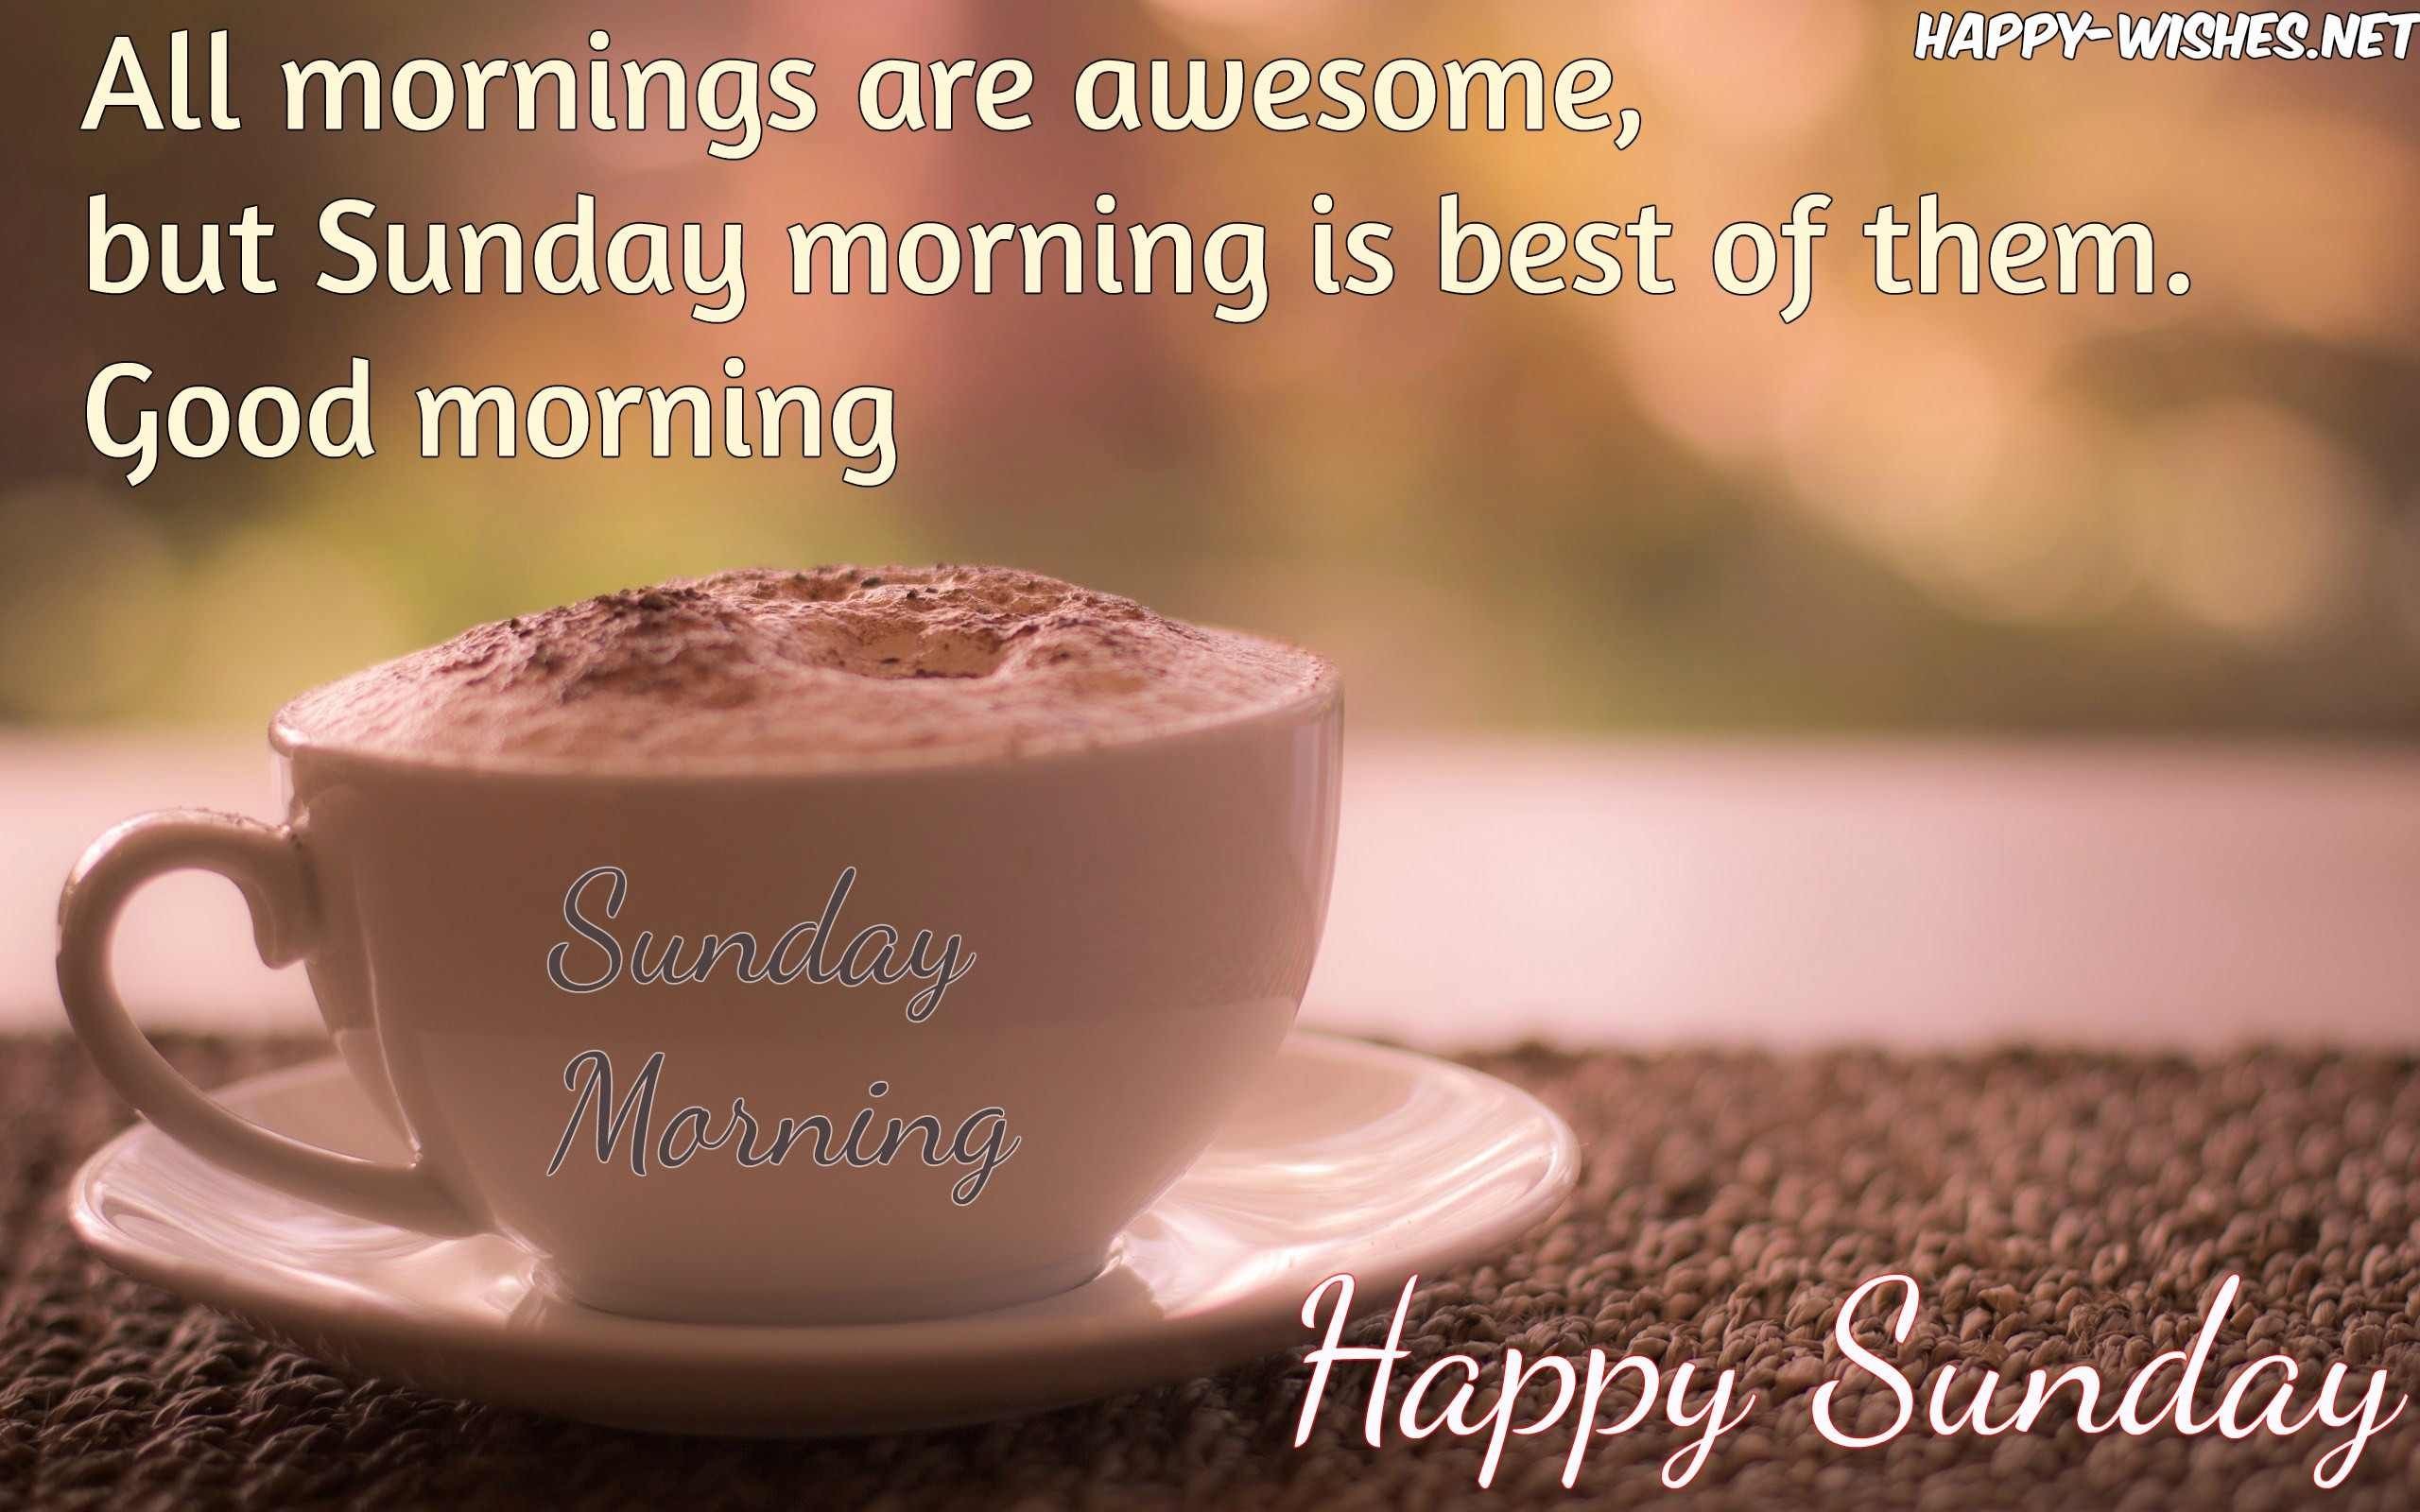 sunday good morning wallpaper,cup,morning,food,cup,non alcoholic beverage